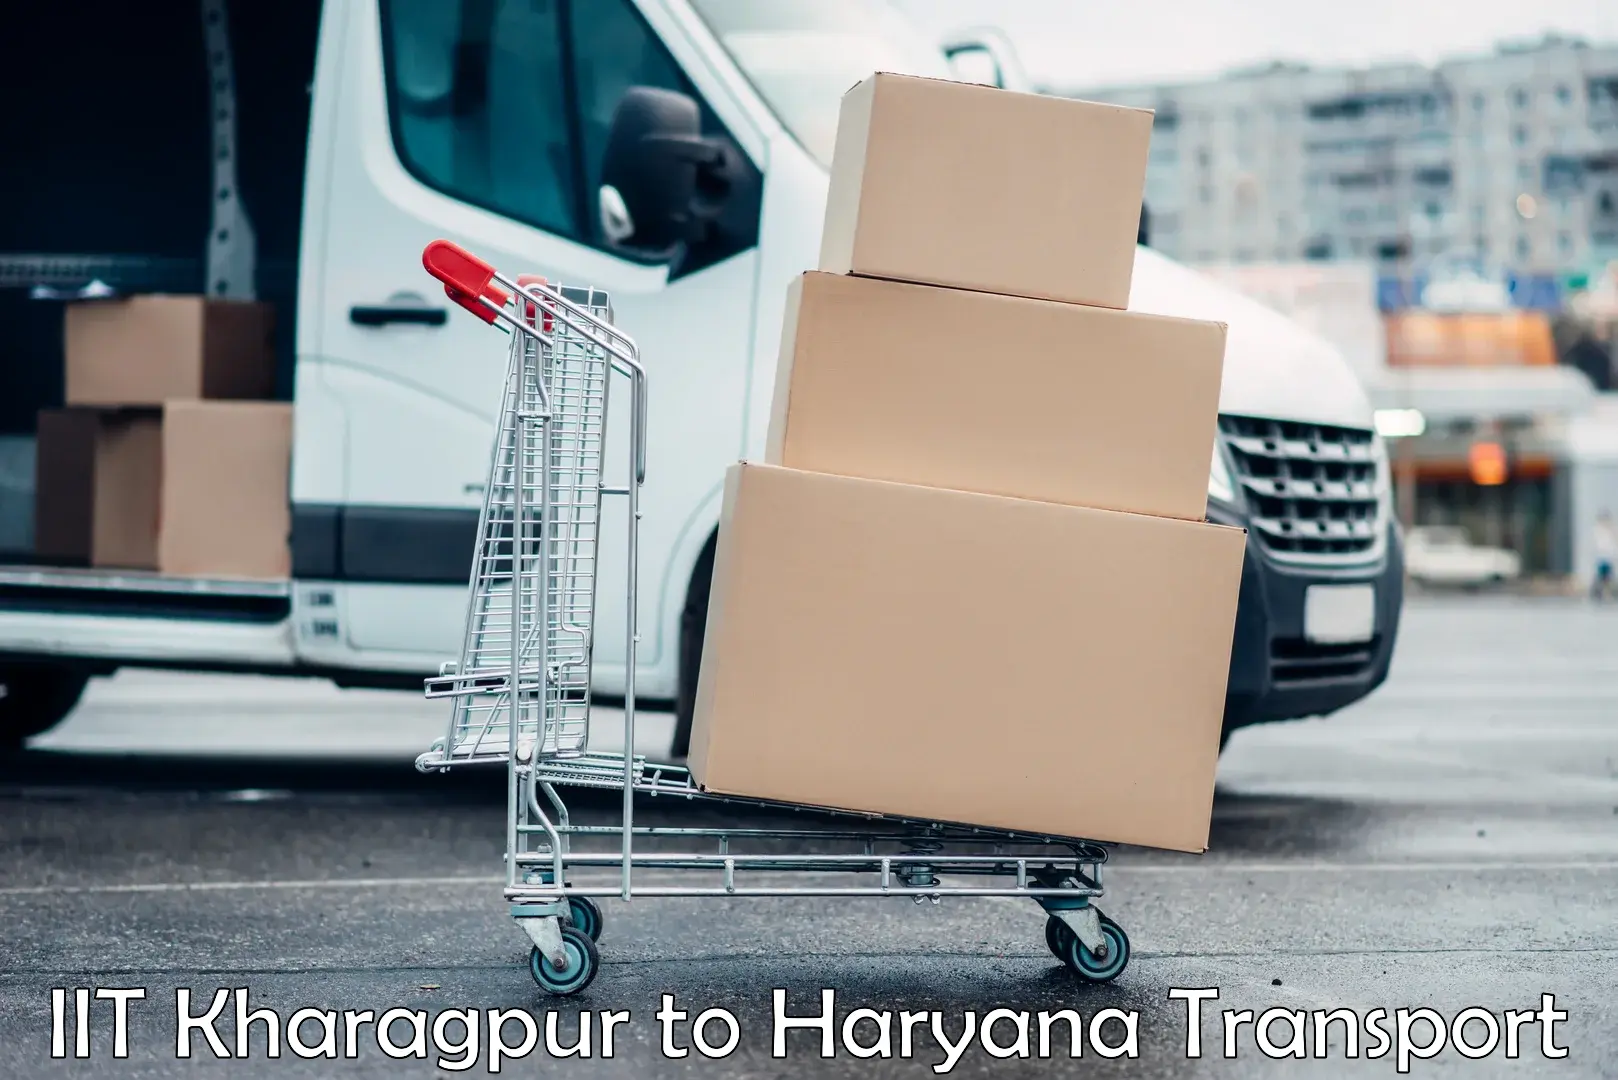 Daily parcel service transport IIT Kharagpur to Narwana